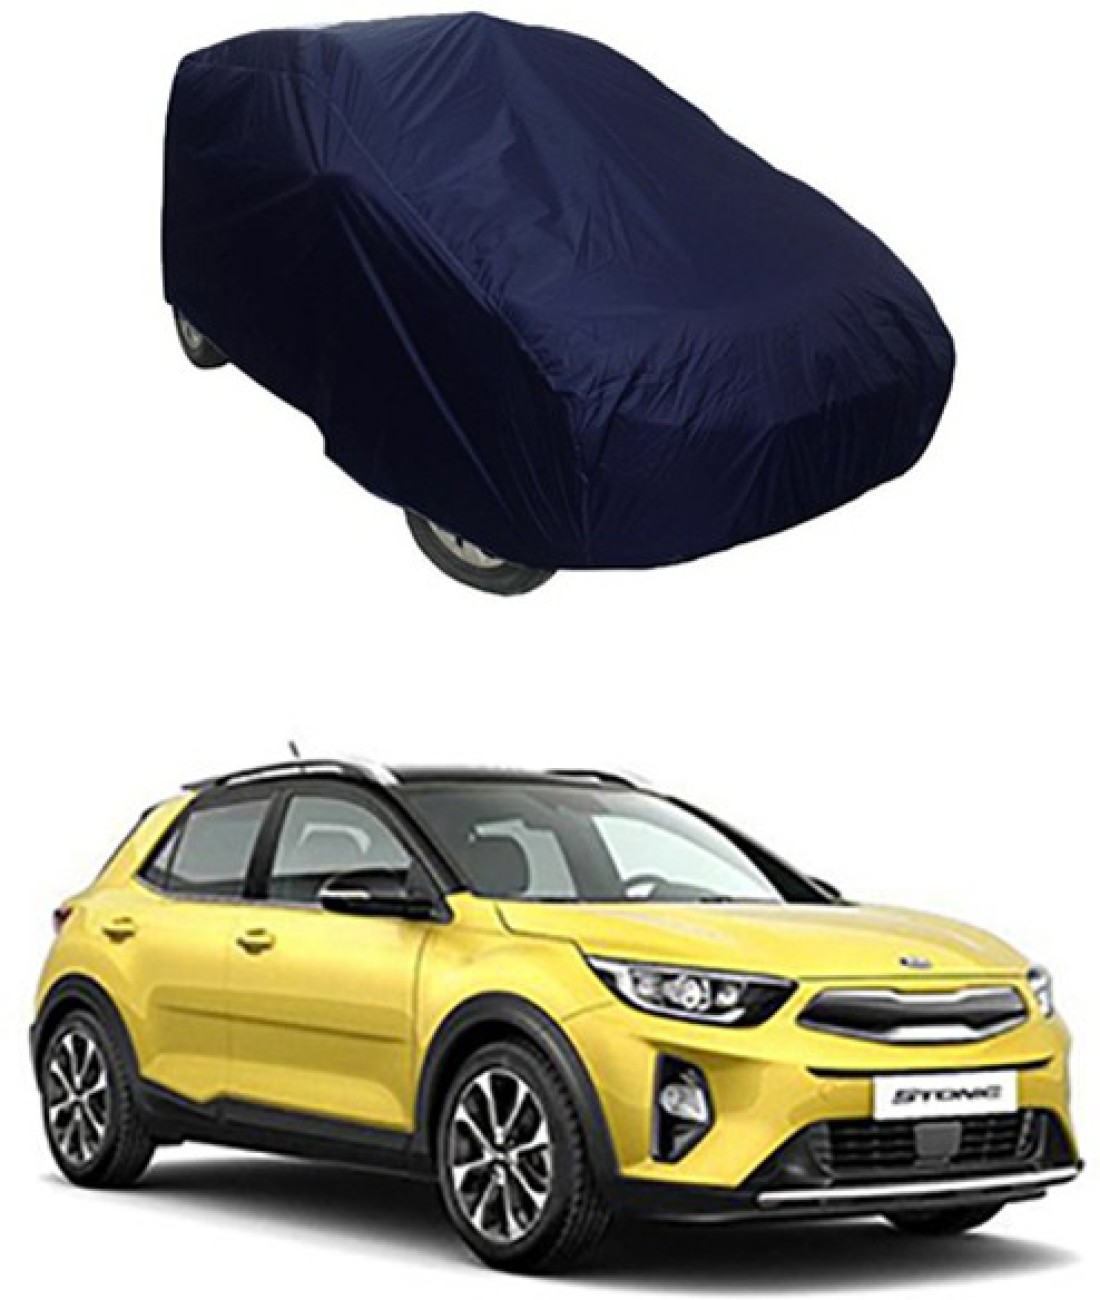 Toy Ville Car Cover For Kia Stonic (Without Mirror Pockets) Price